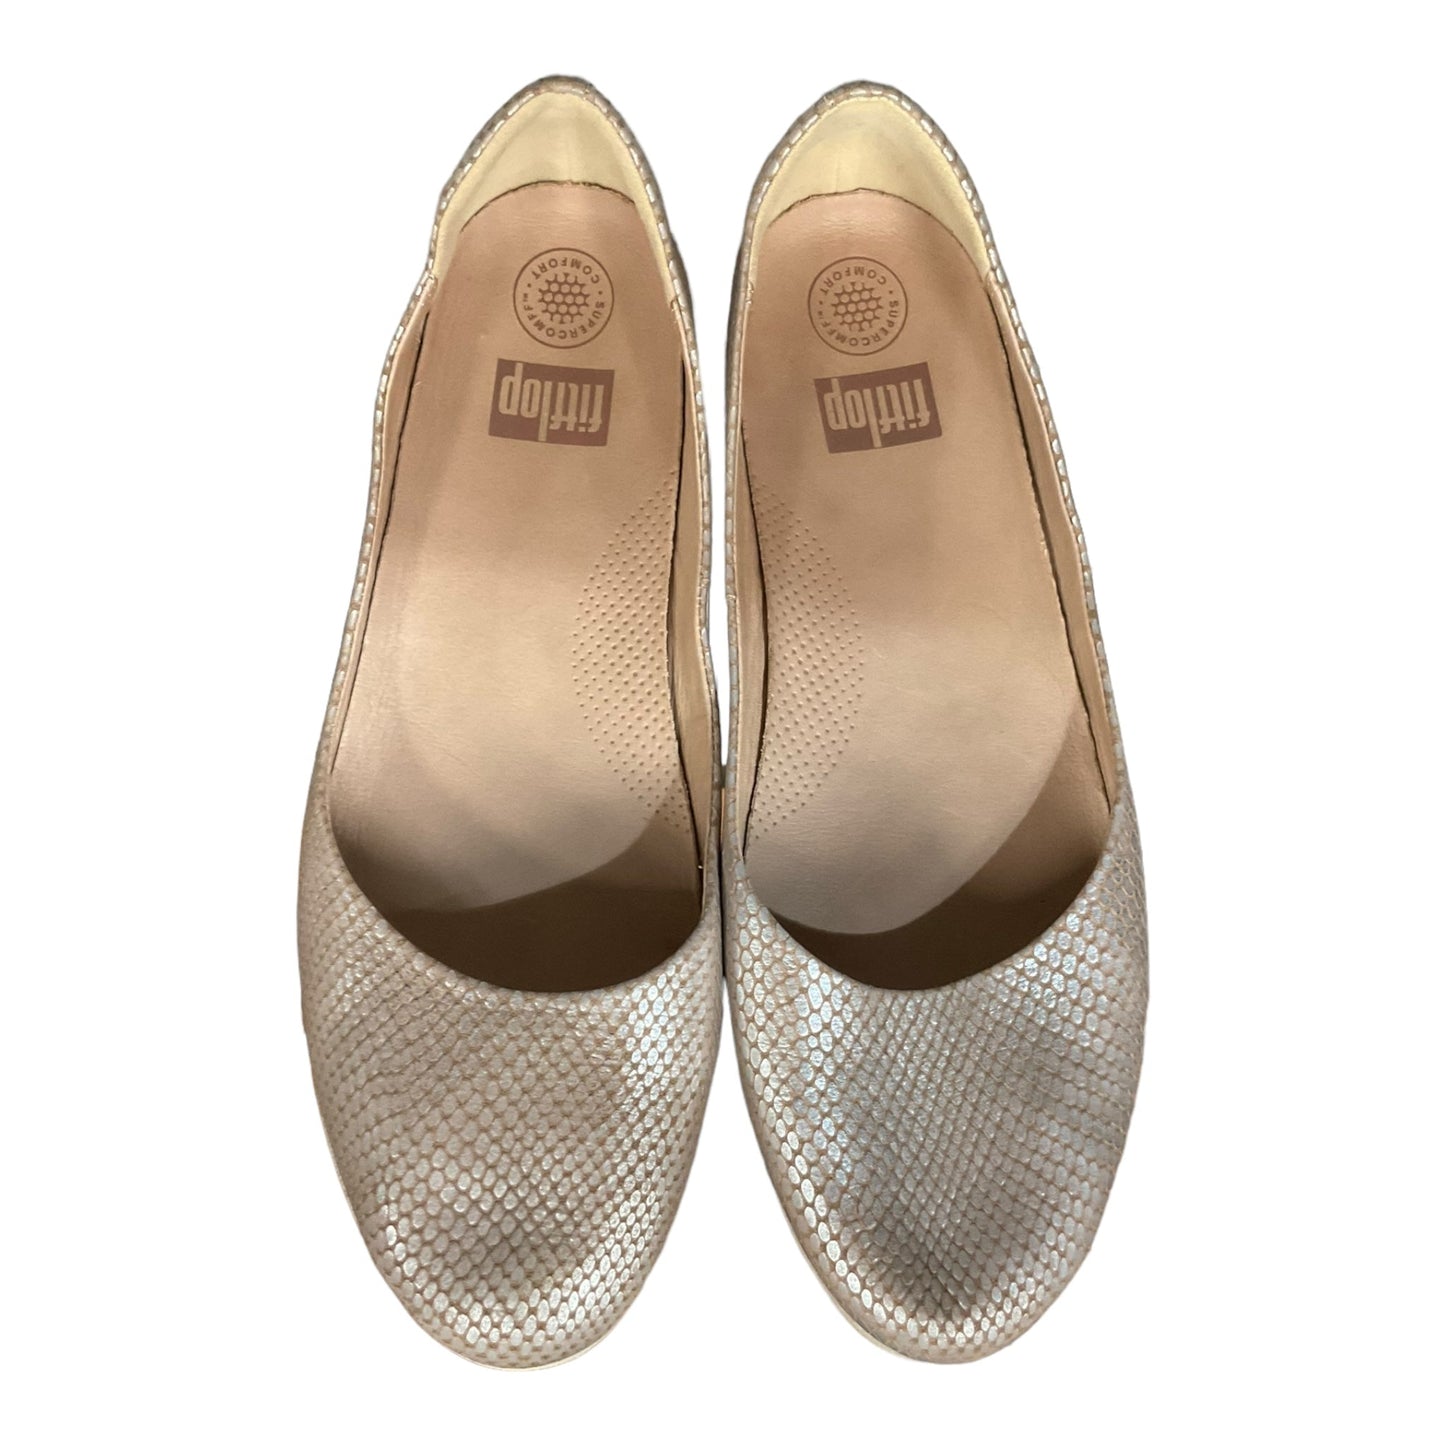 Silver Shoes Flats Fitflop, Size 11